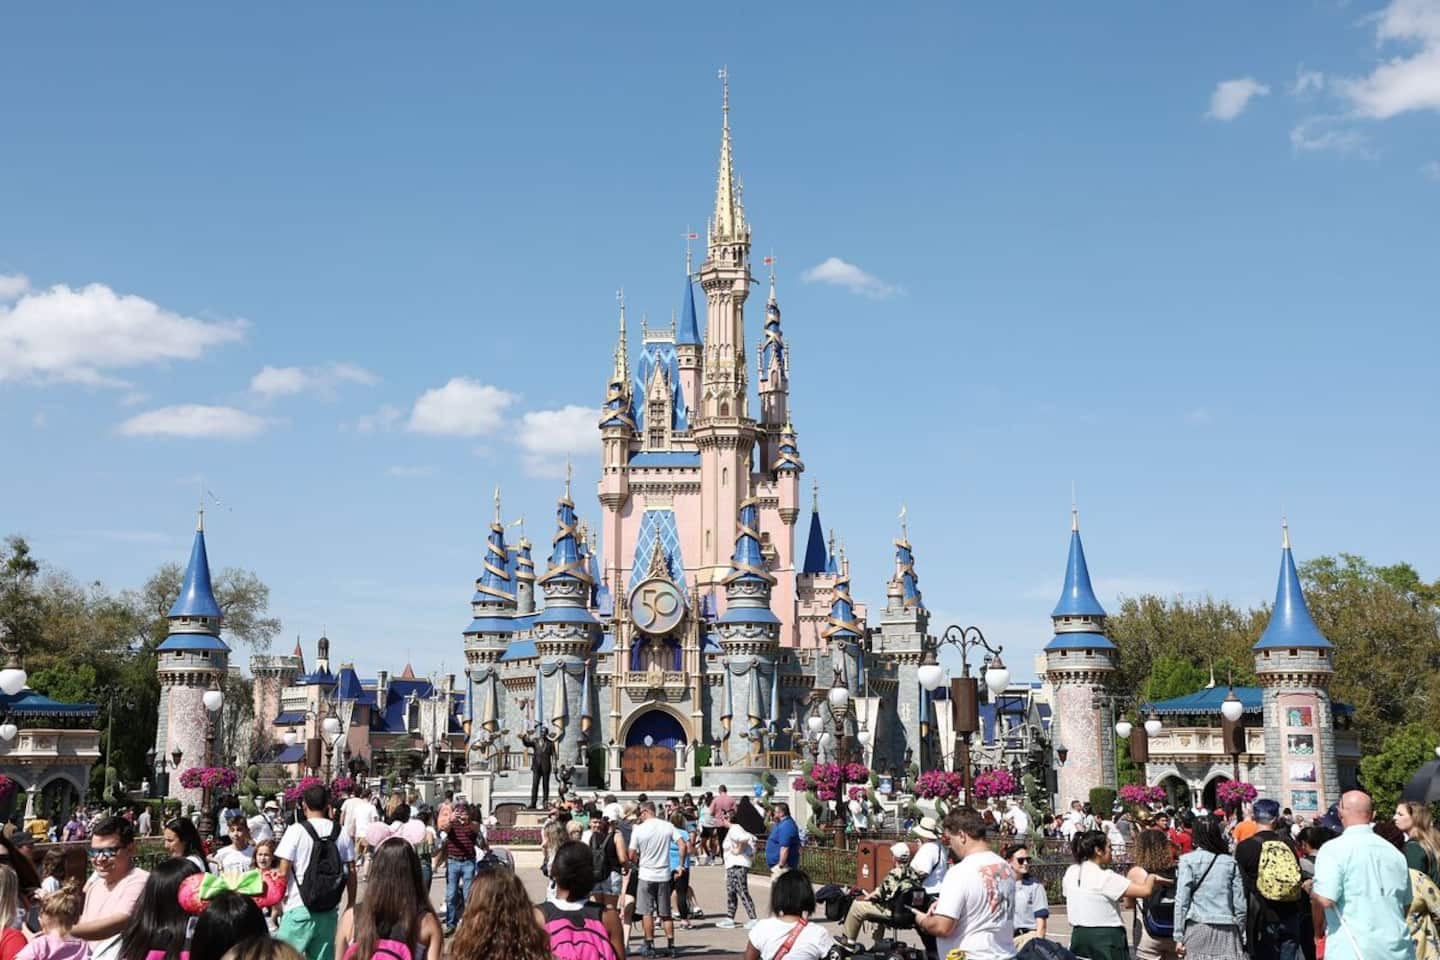 12 Disney Parks by Private Jet for Just...$110,000